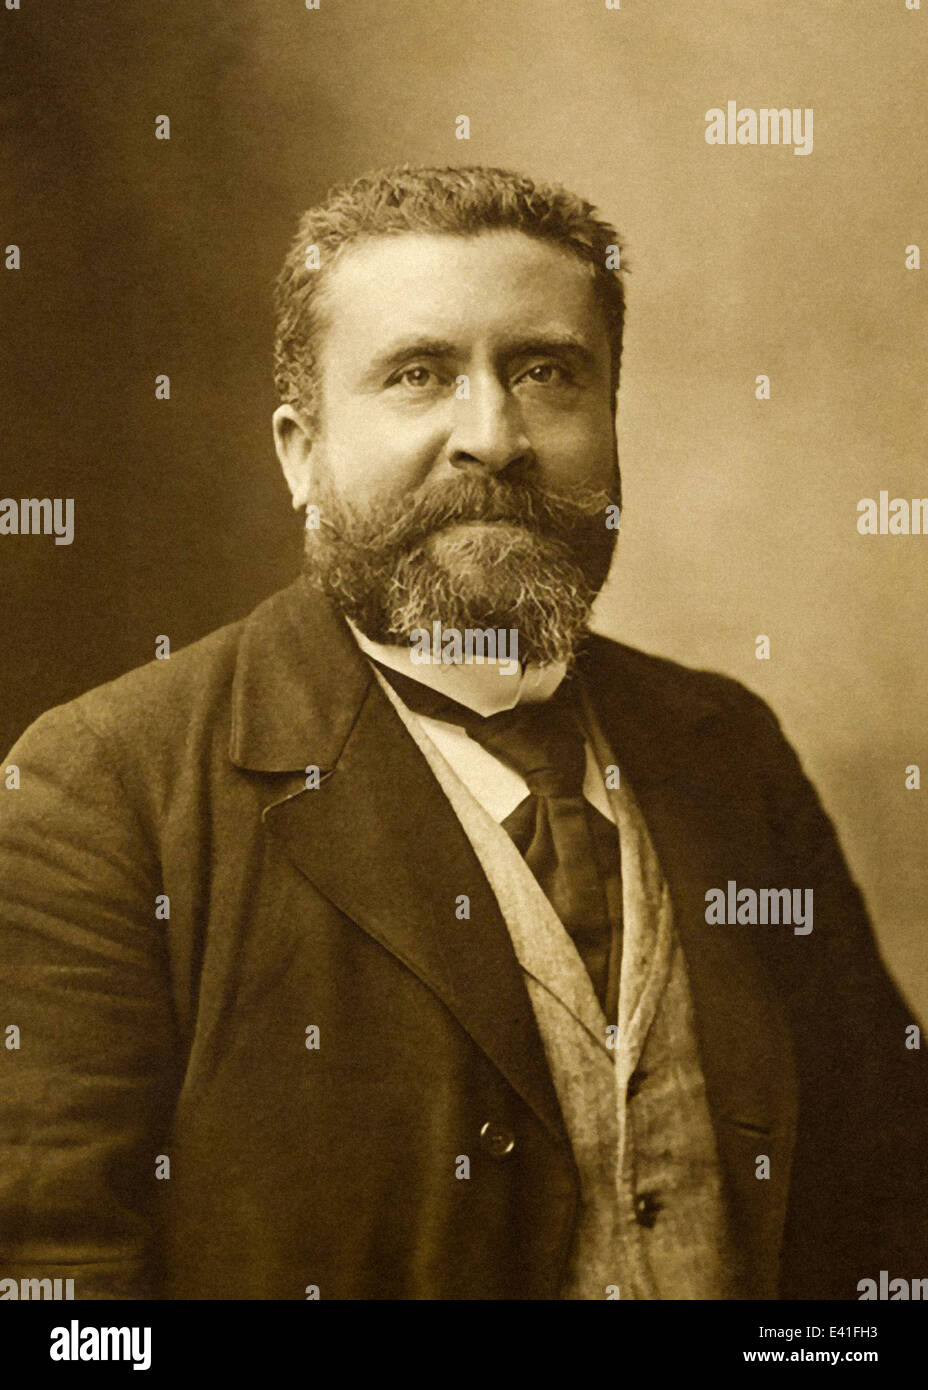 Jean Jaurès (1859-1914), social democrat who became leader of the French Socialist Party in 1902. Stock Photo